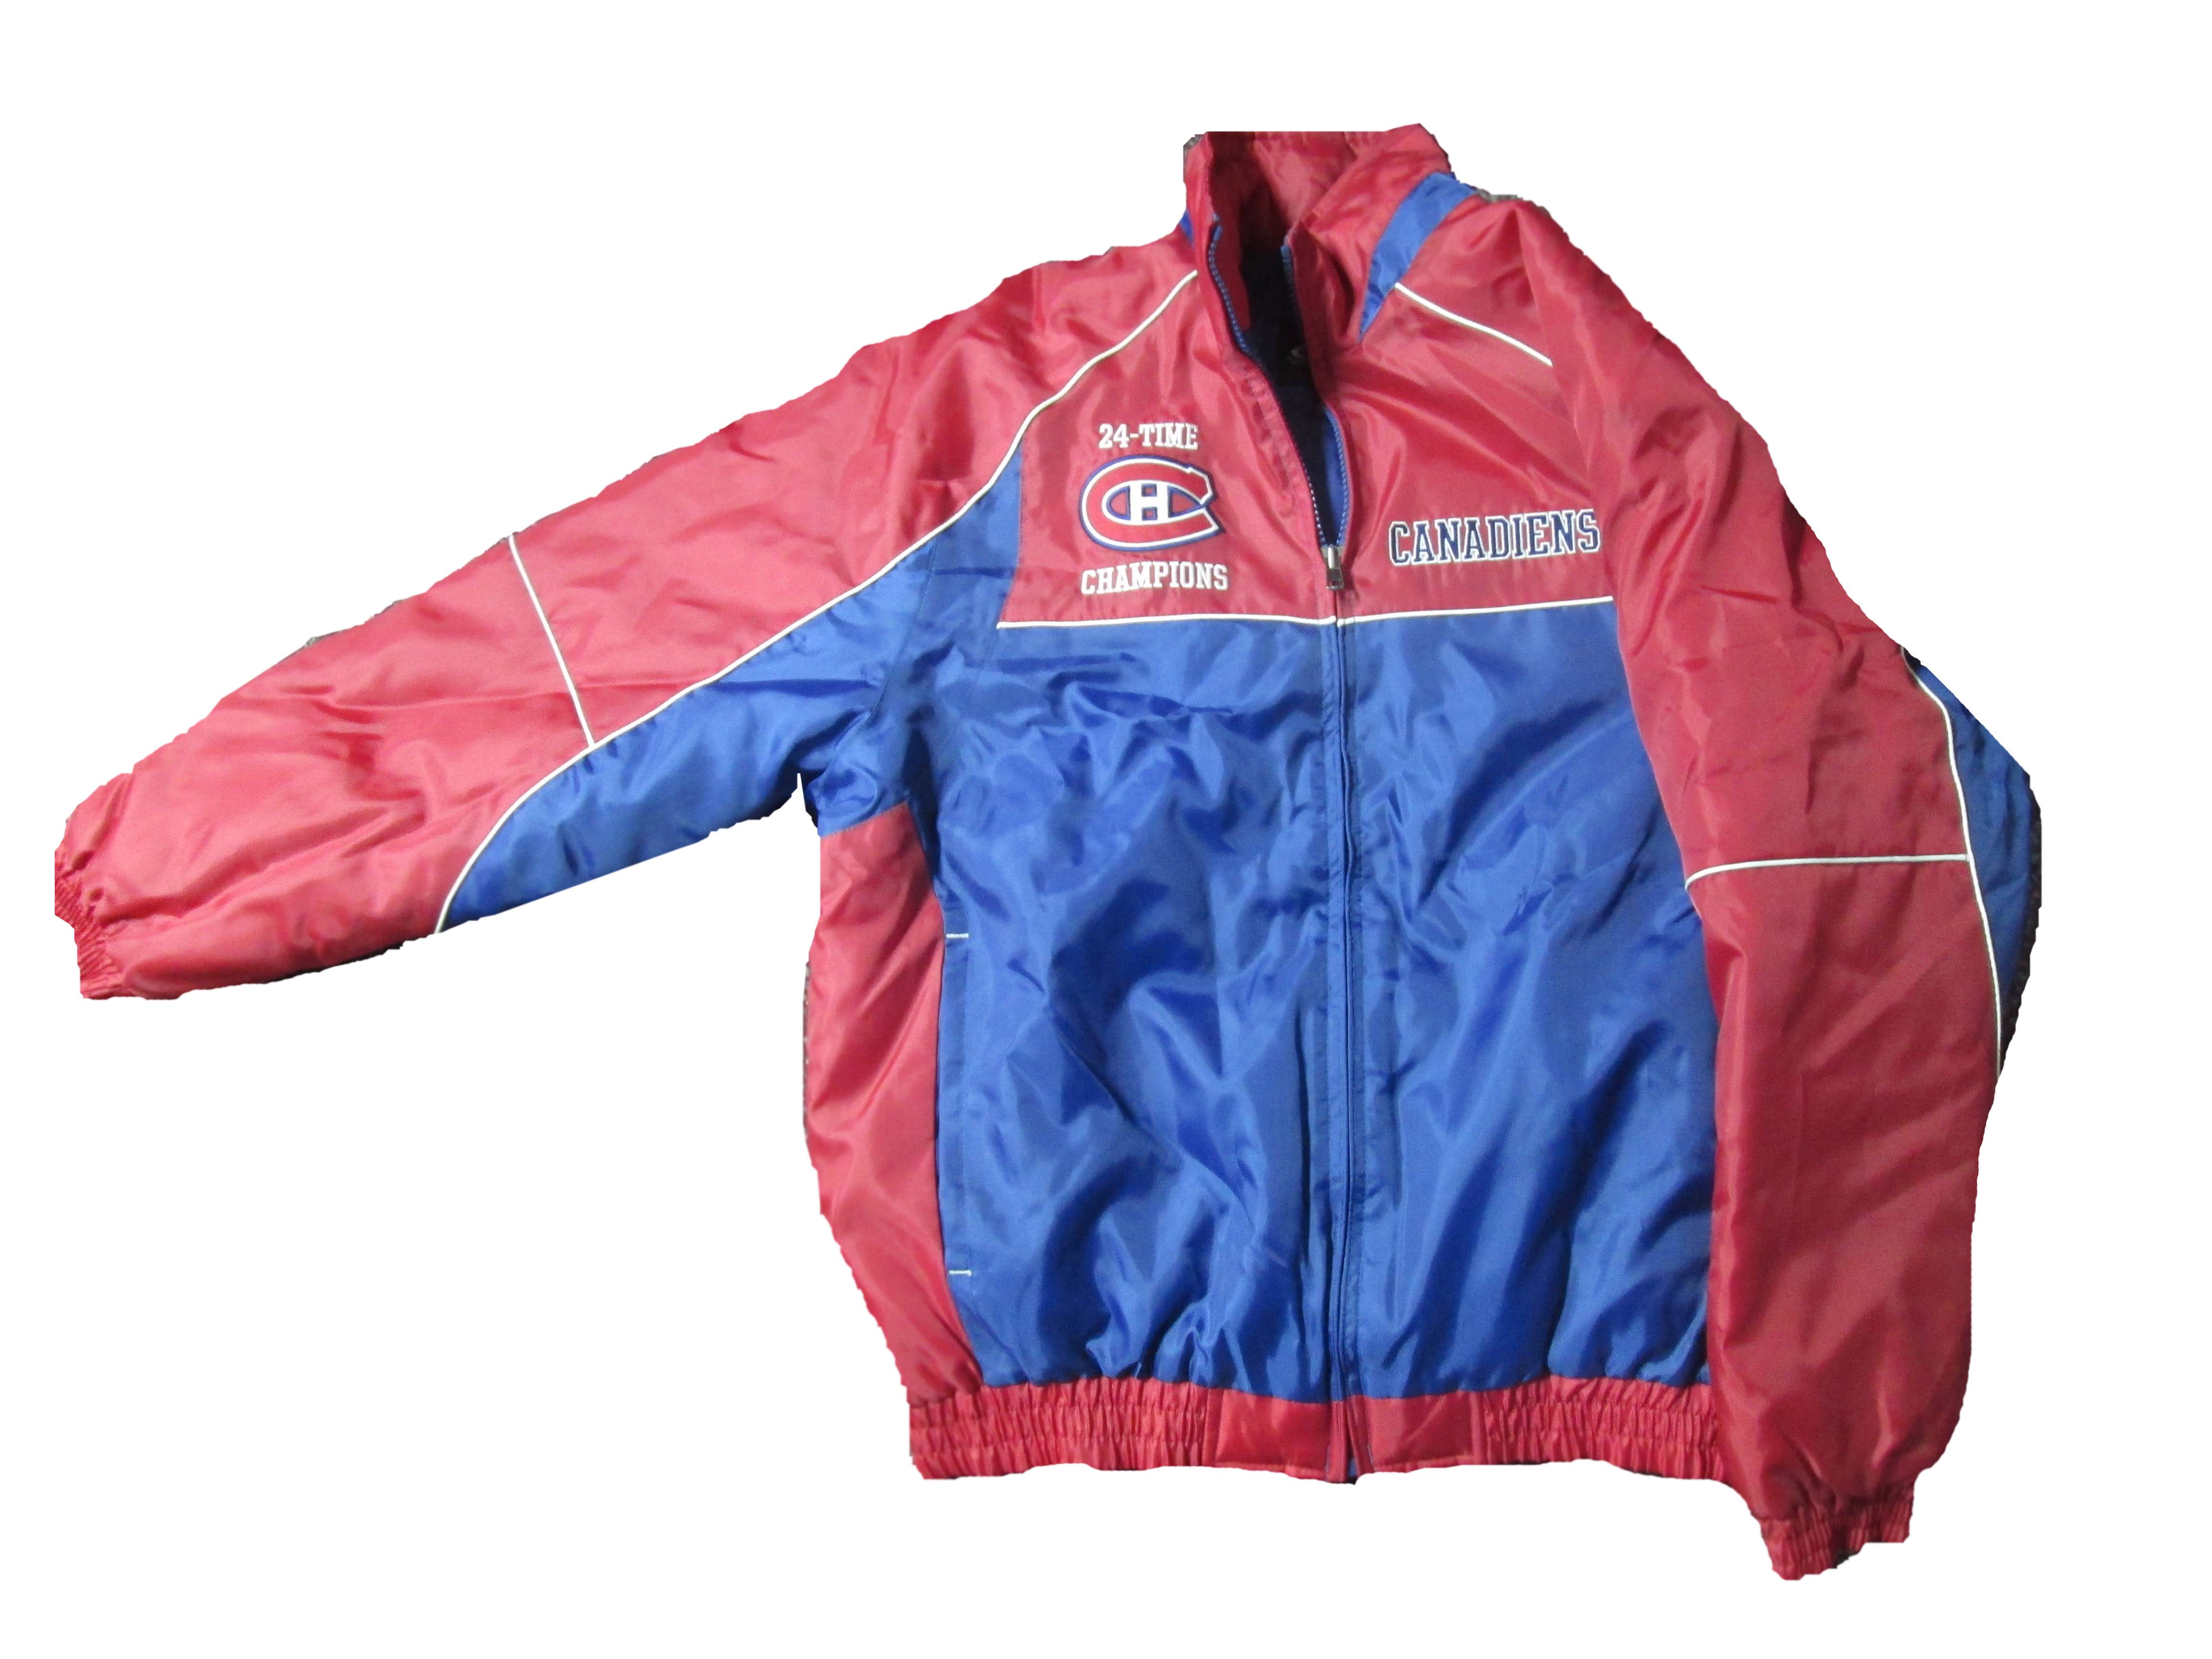 Montreal Canadiens "24-Time Champions" Winter Jacket (XL) - Miraj Trading